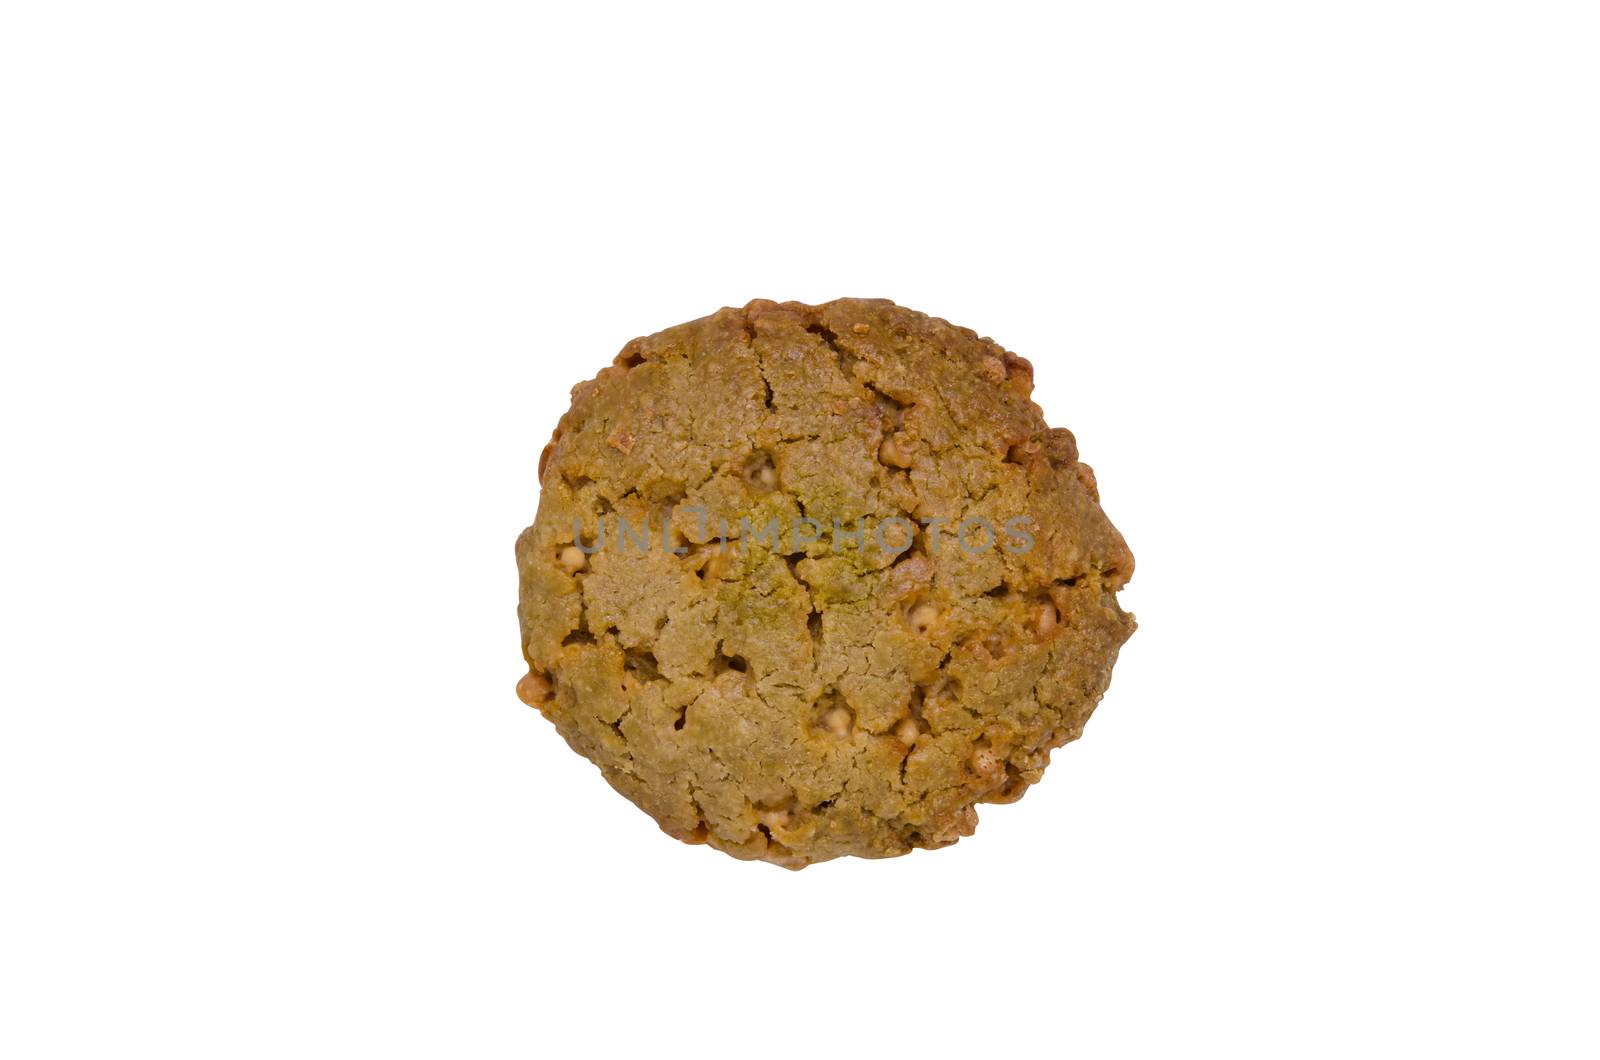 Oatmeal cookies on white background clipping path by phochi